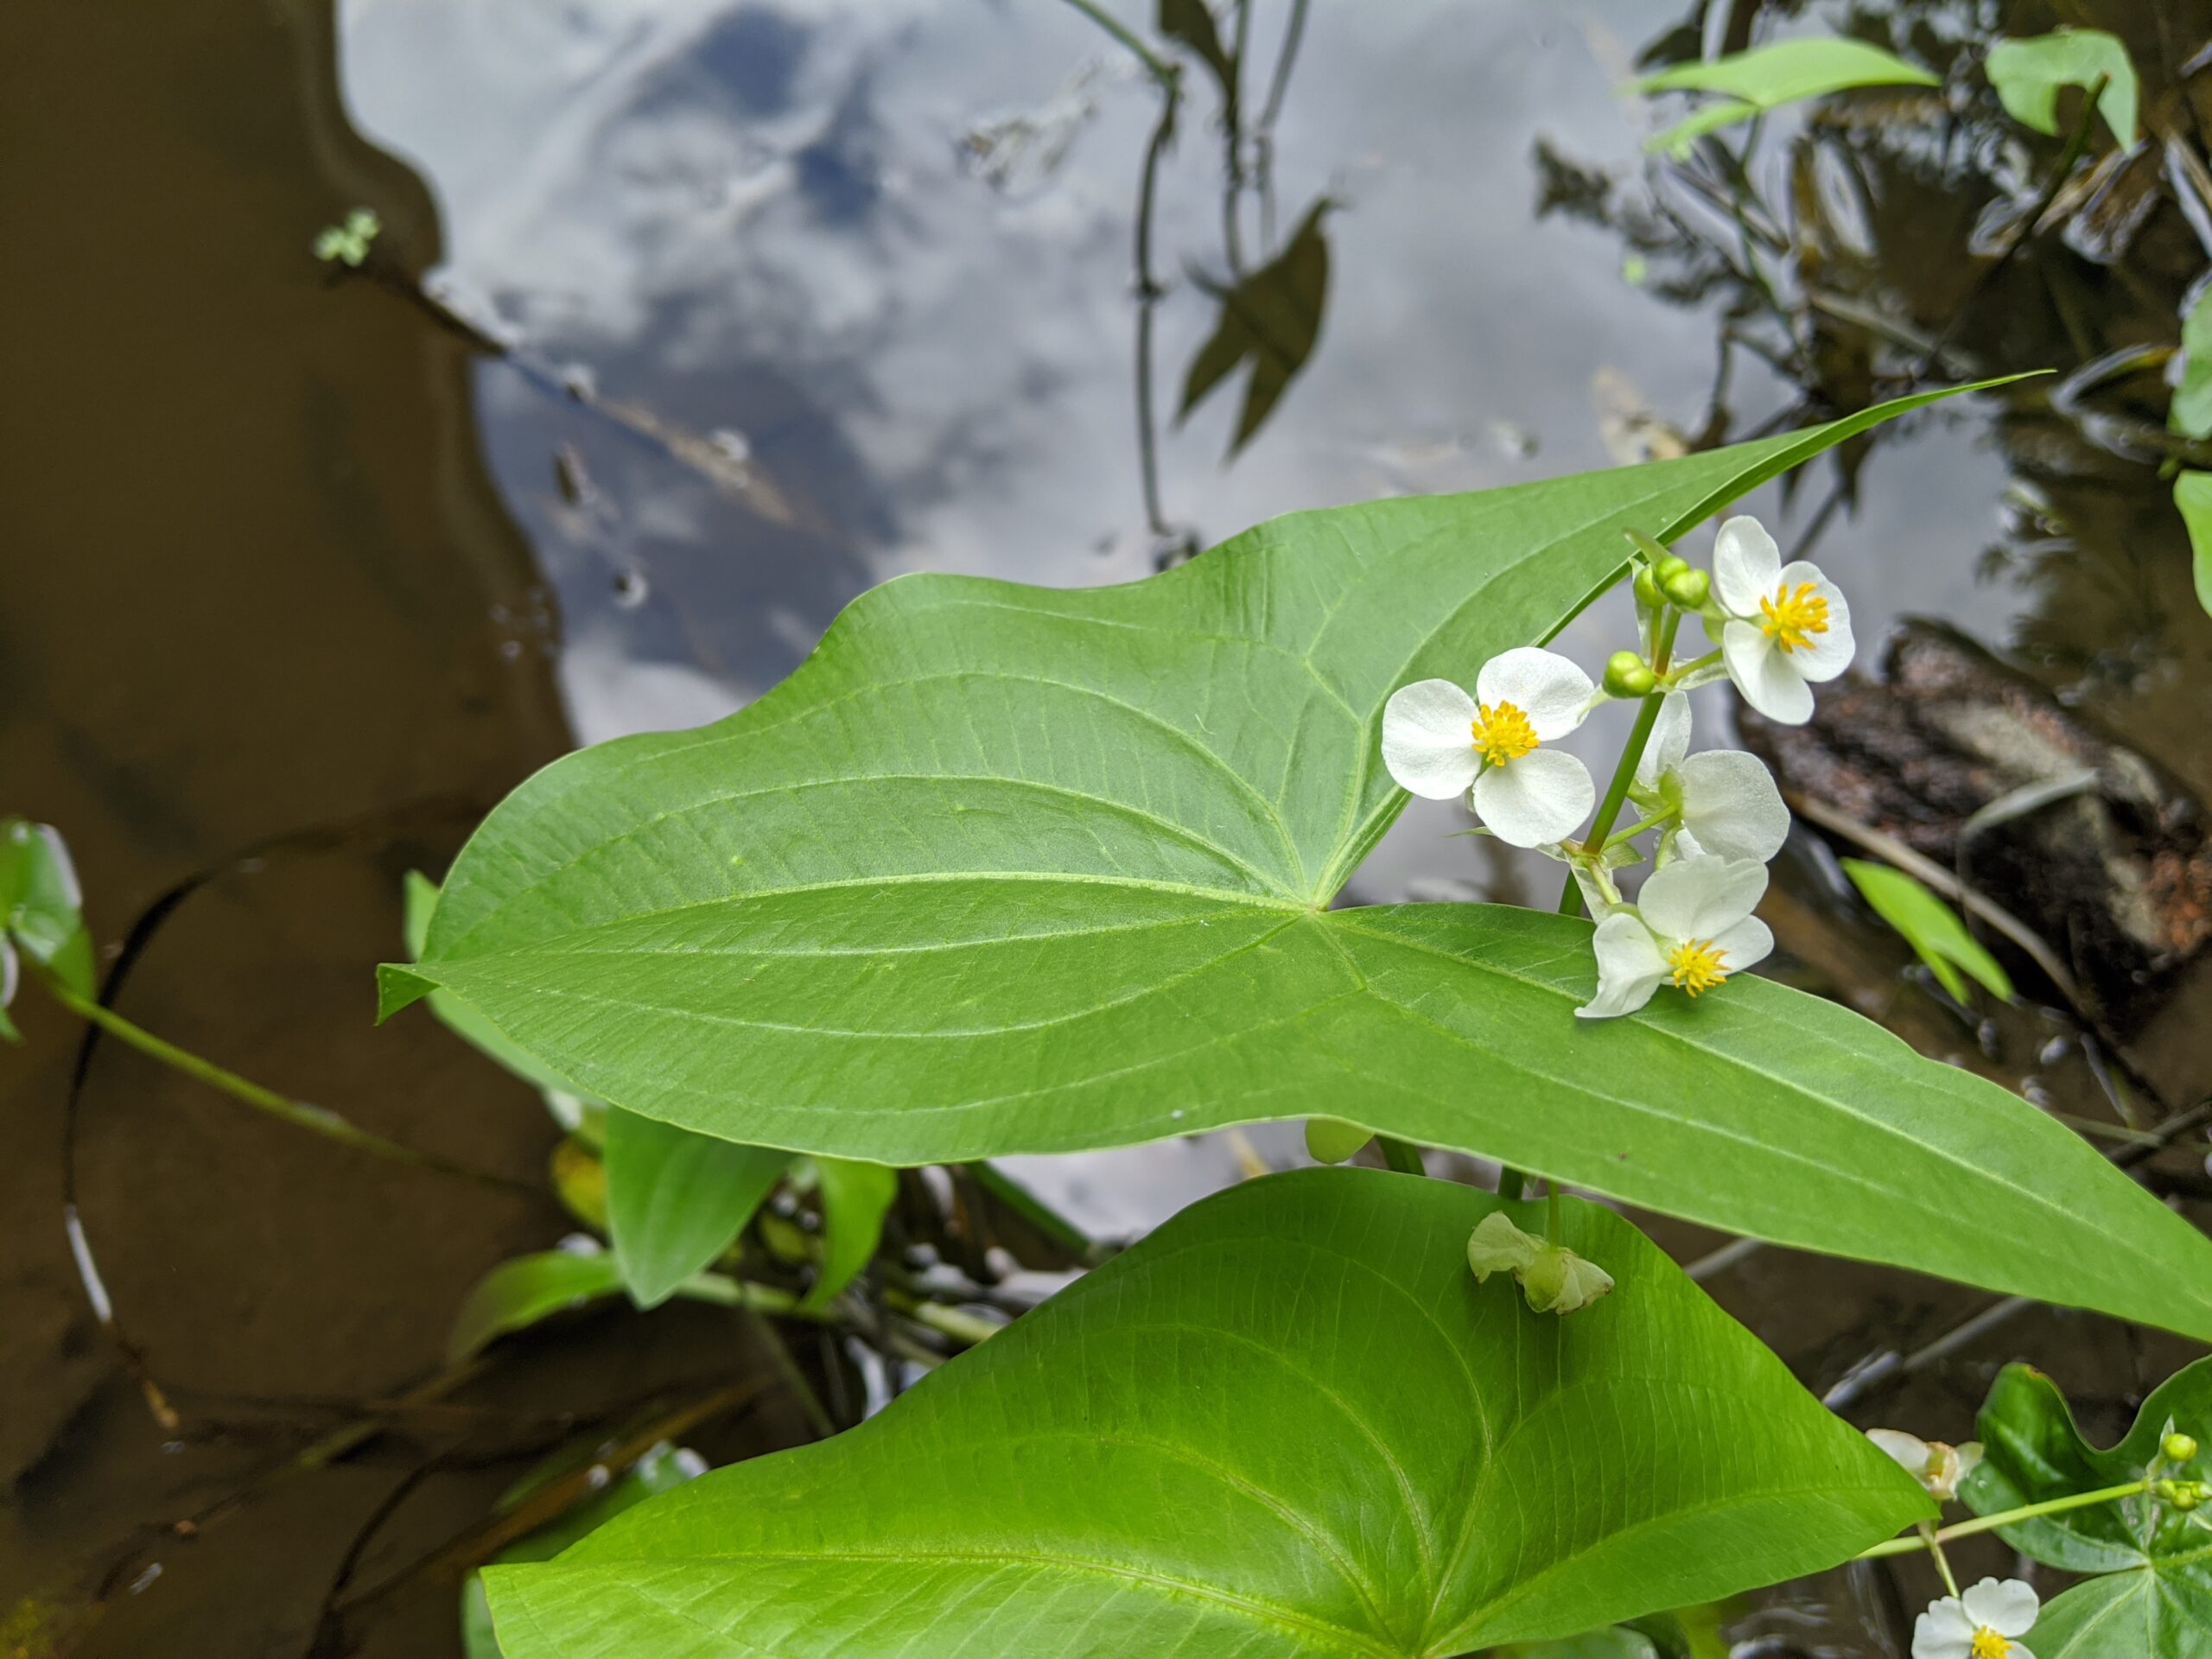 Protecting Lakes with Native Plants